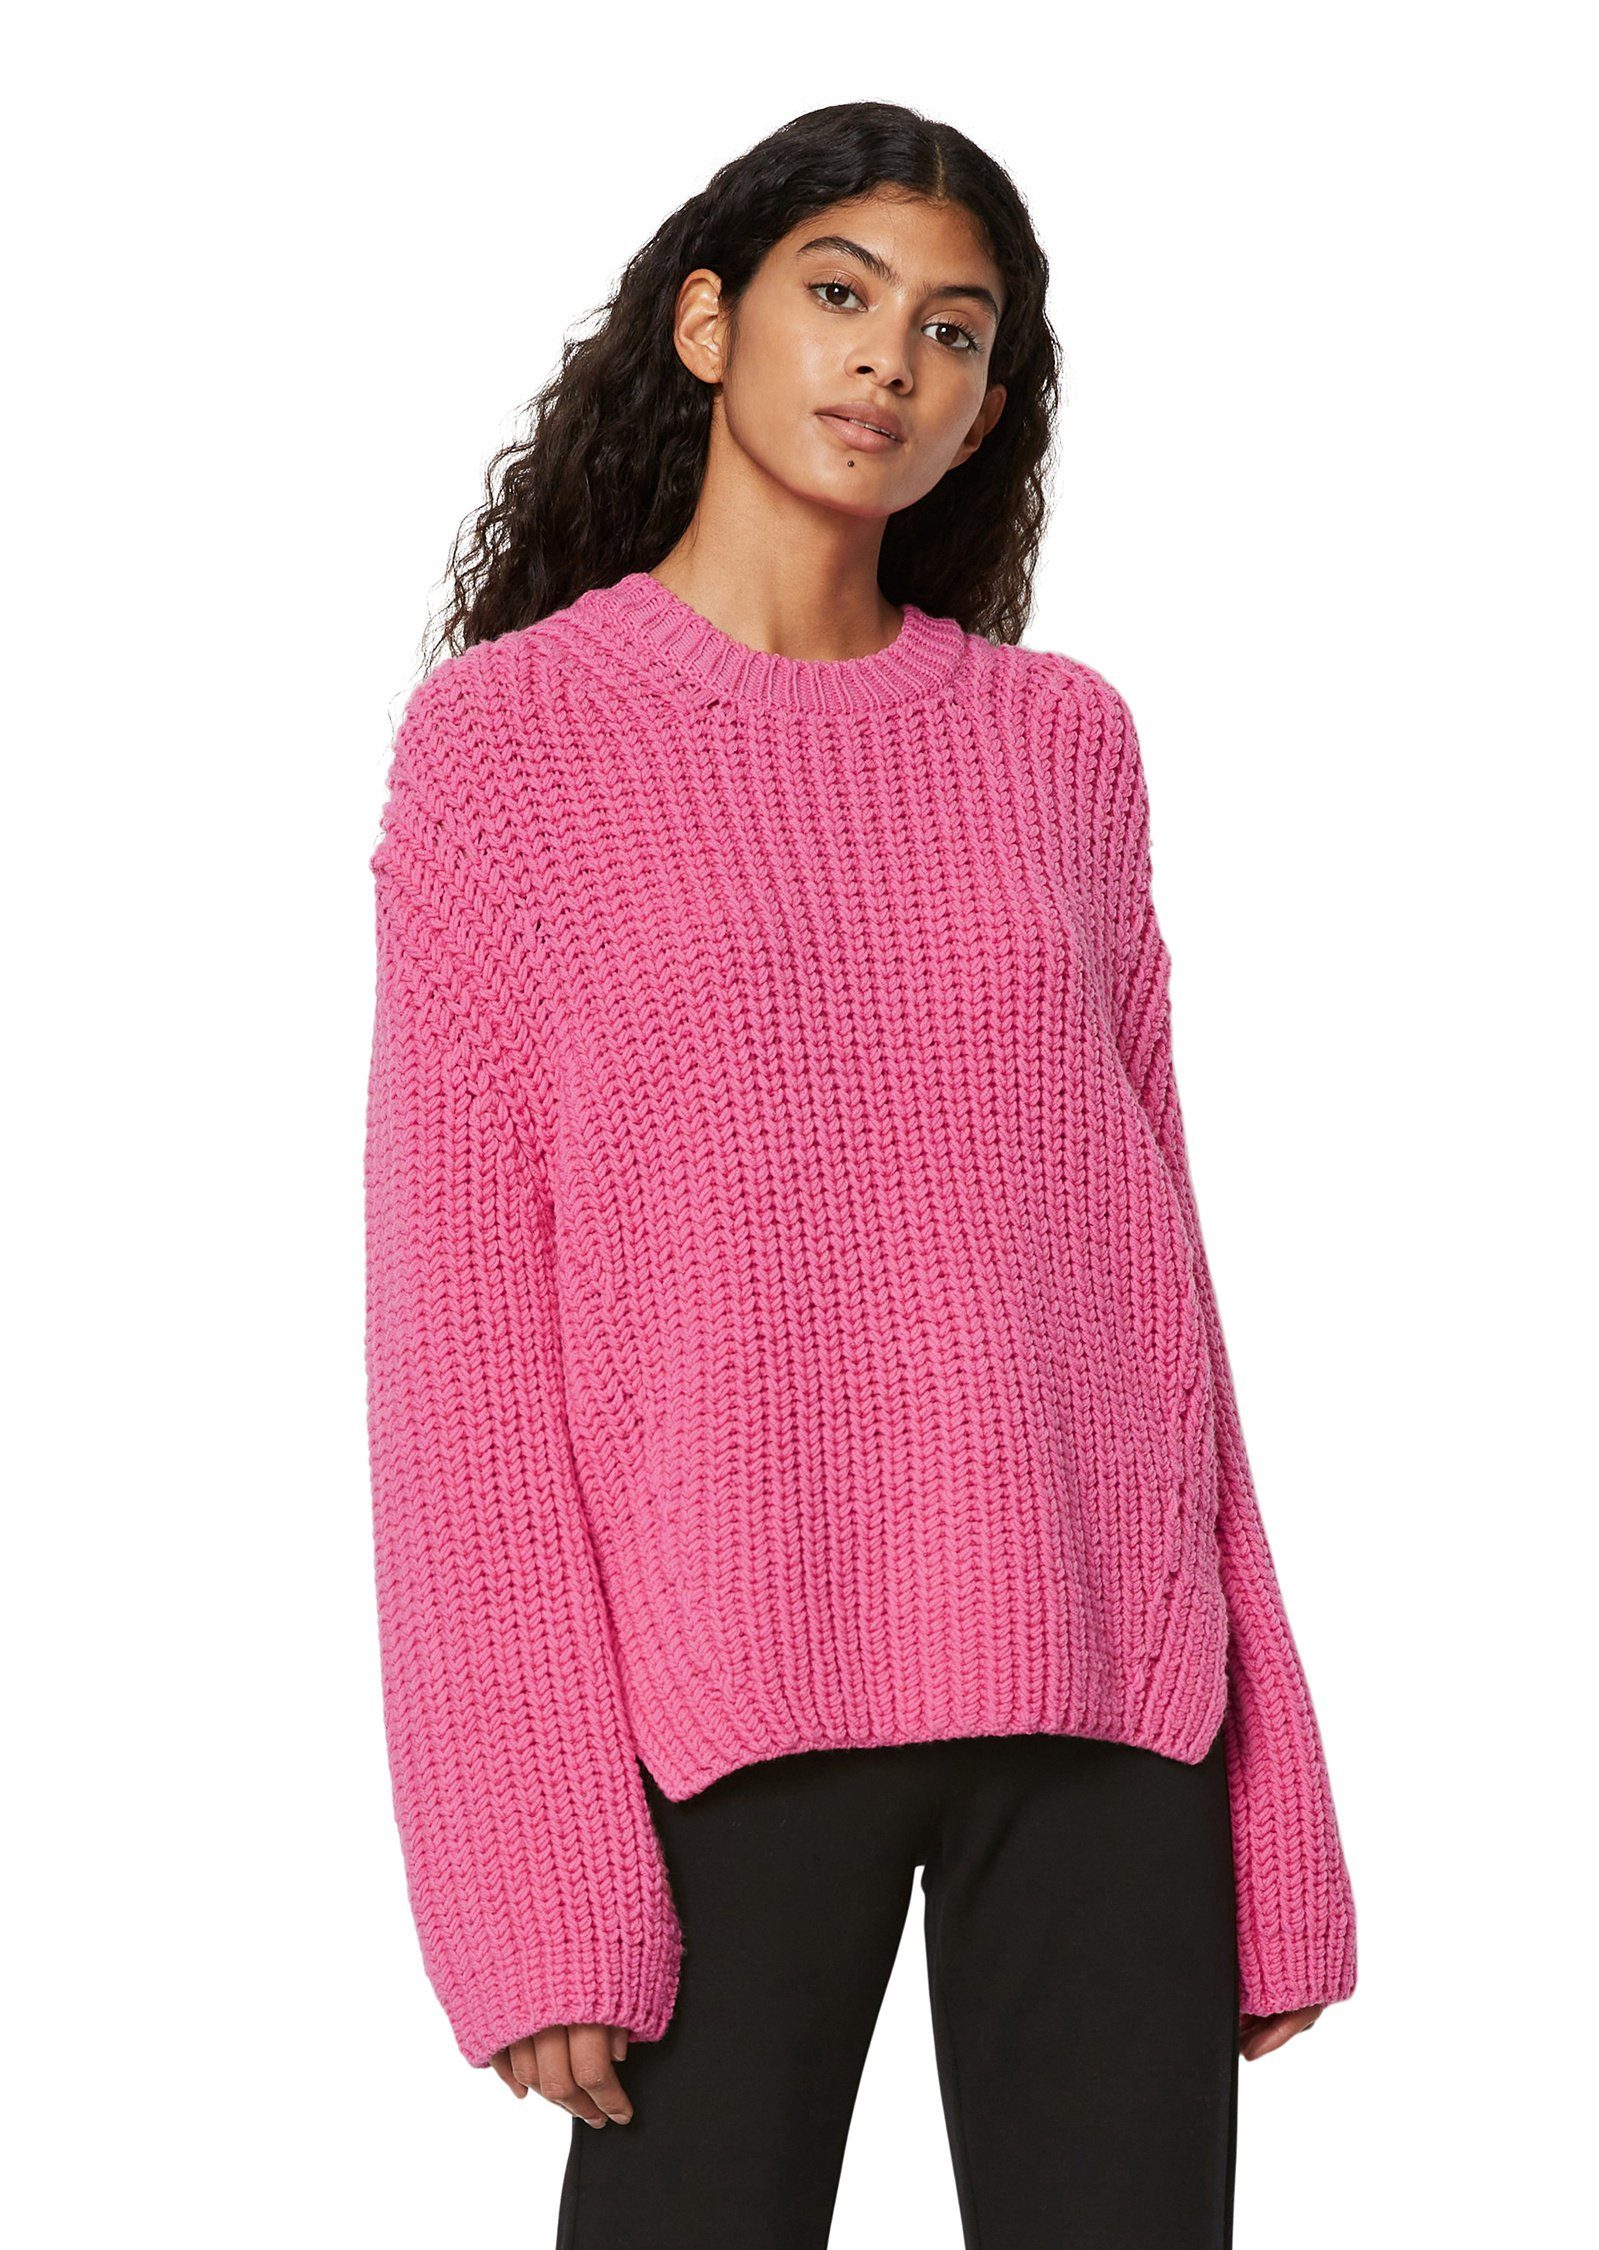 Marc O'Polo Strickpullover aus softer Schurwolle rosa